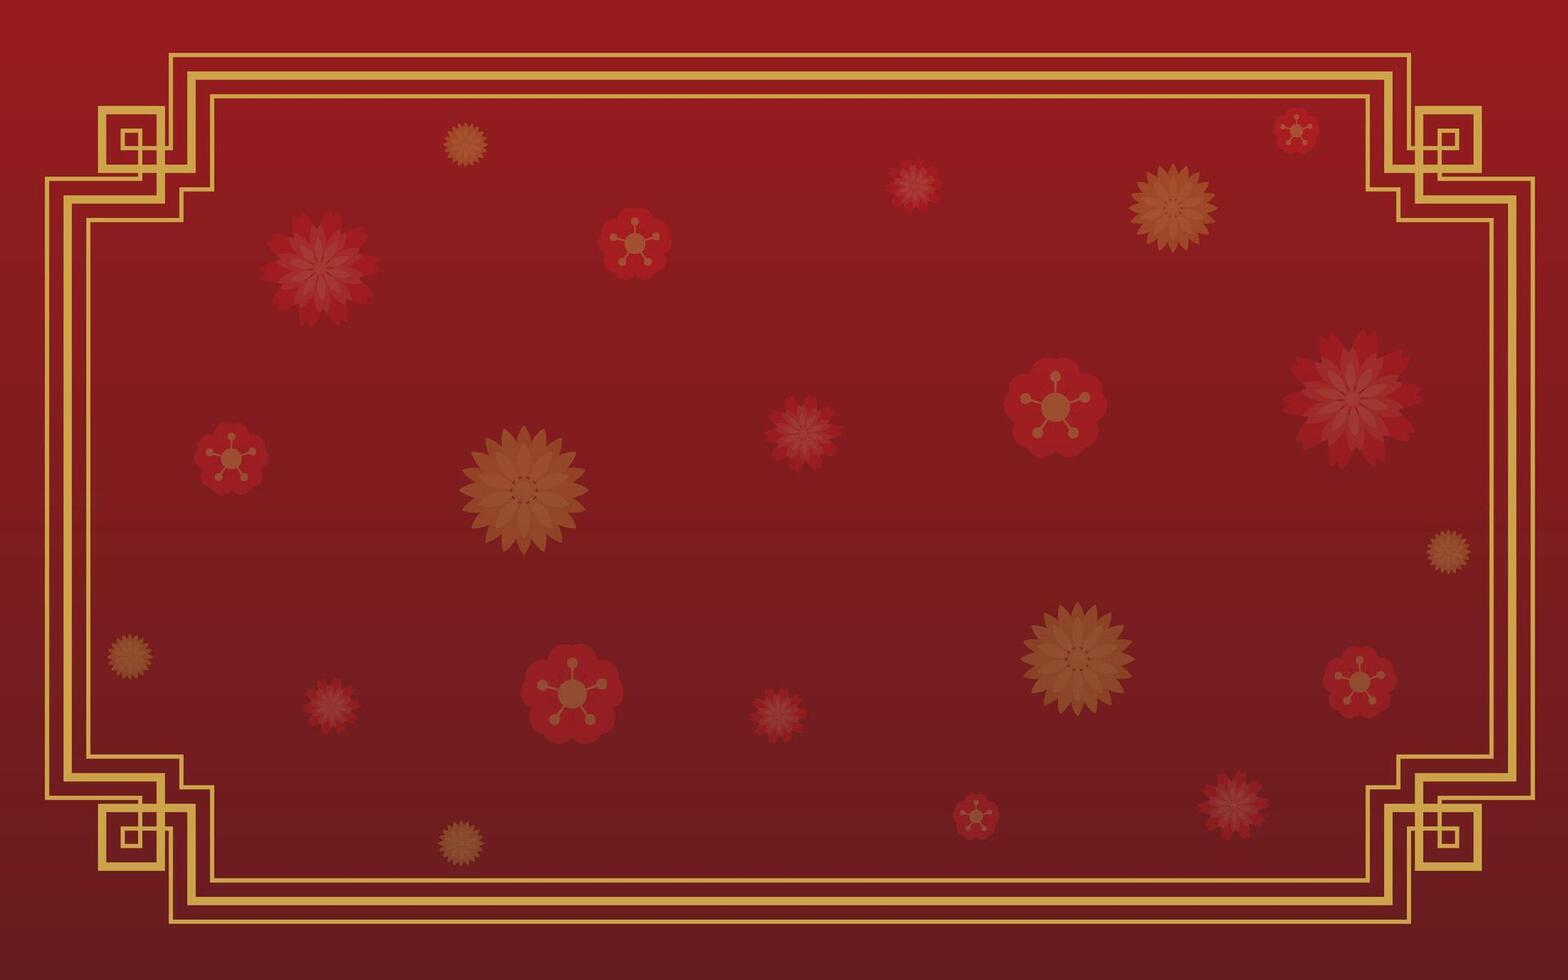 Background illustration for designing online signs or banners for Chinese New Year-06 vector